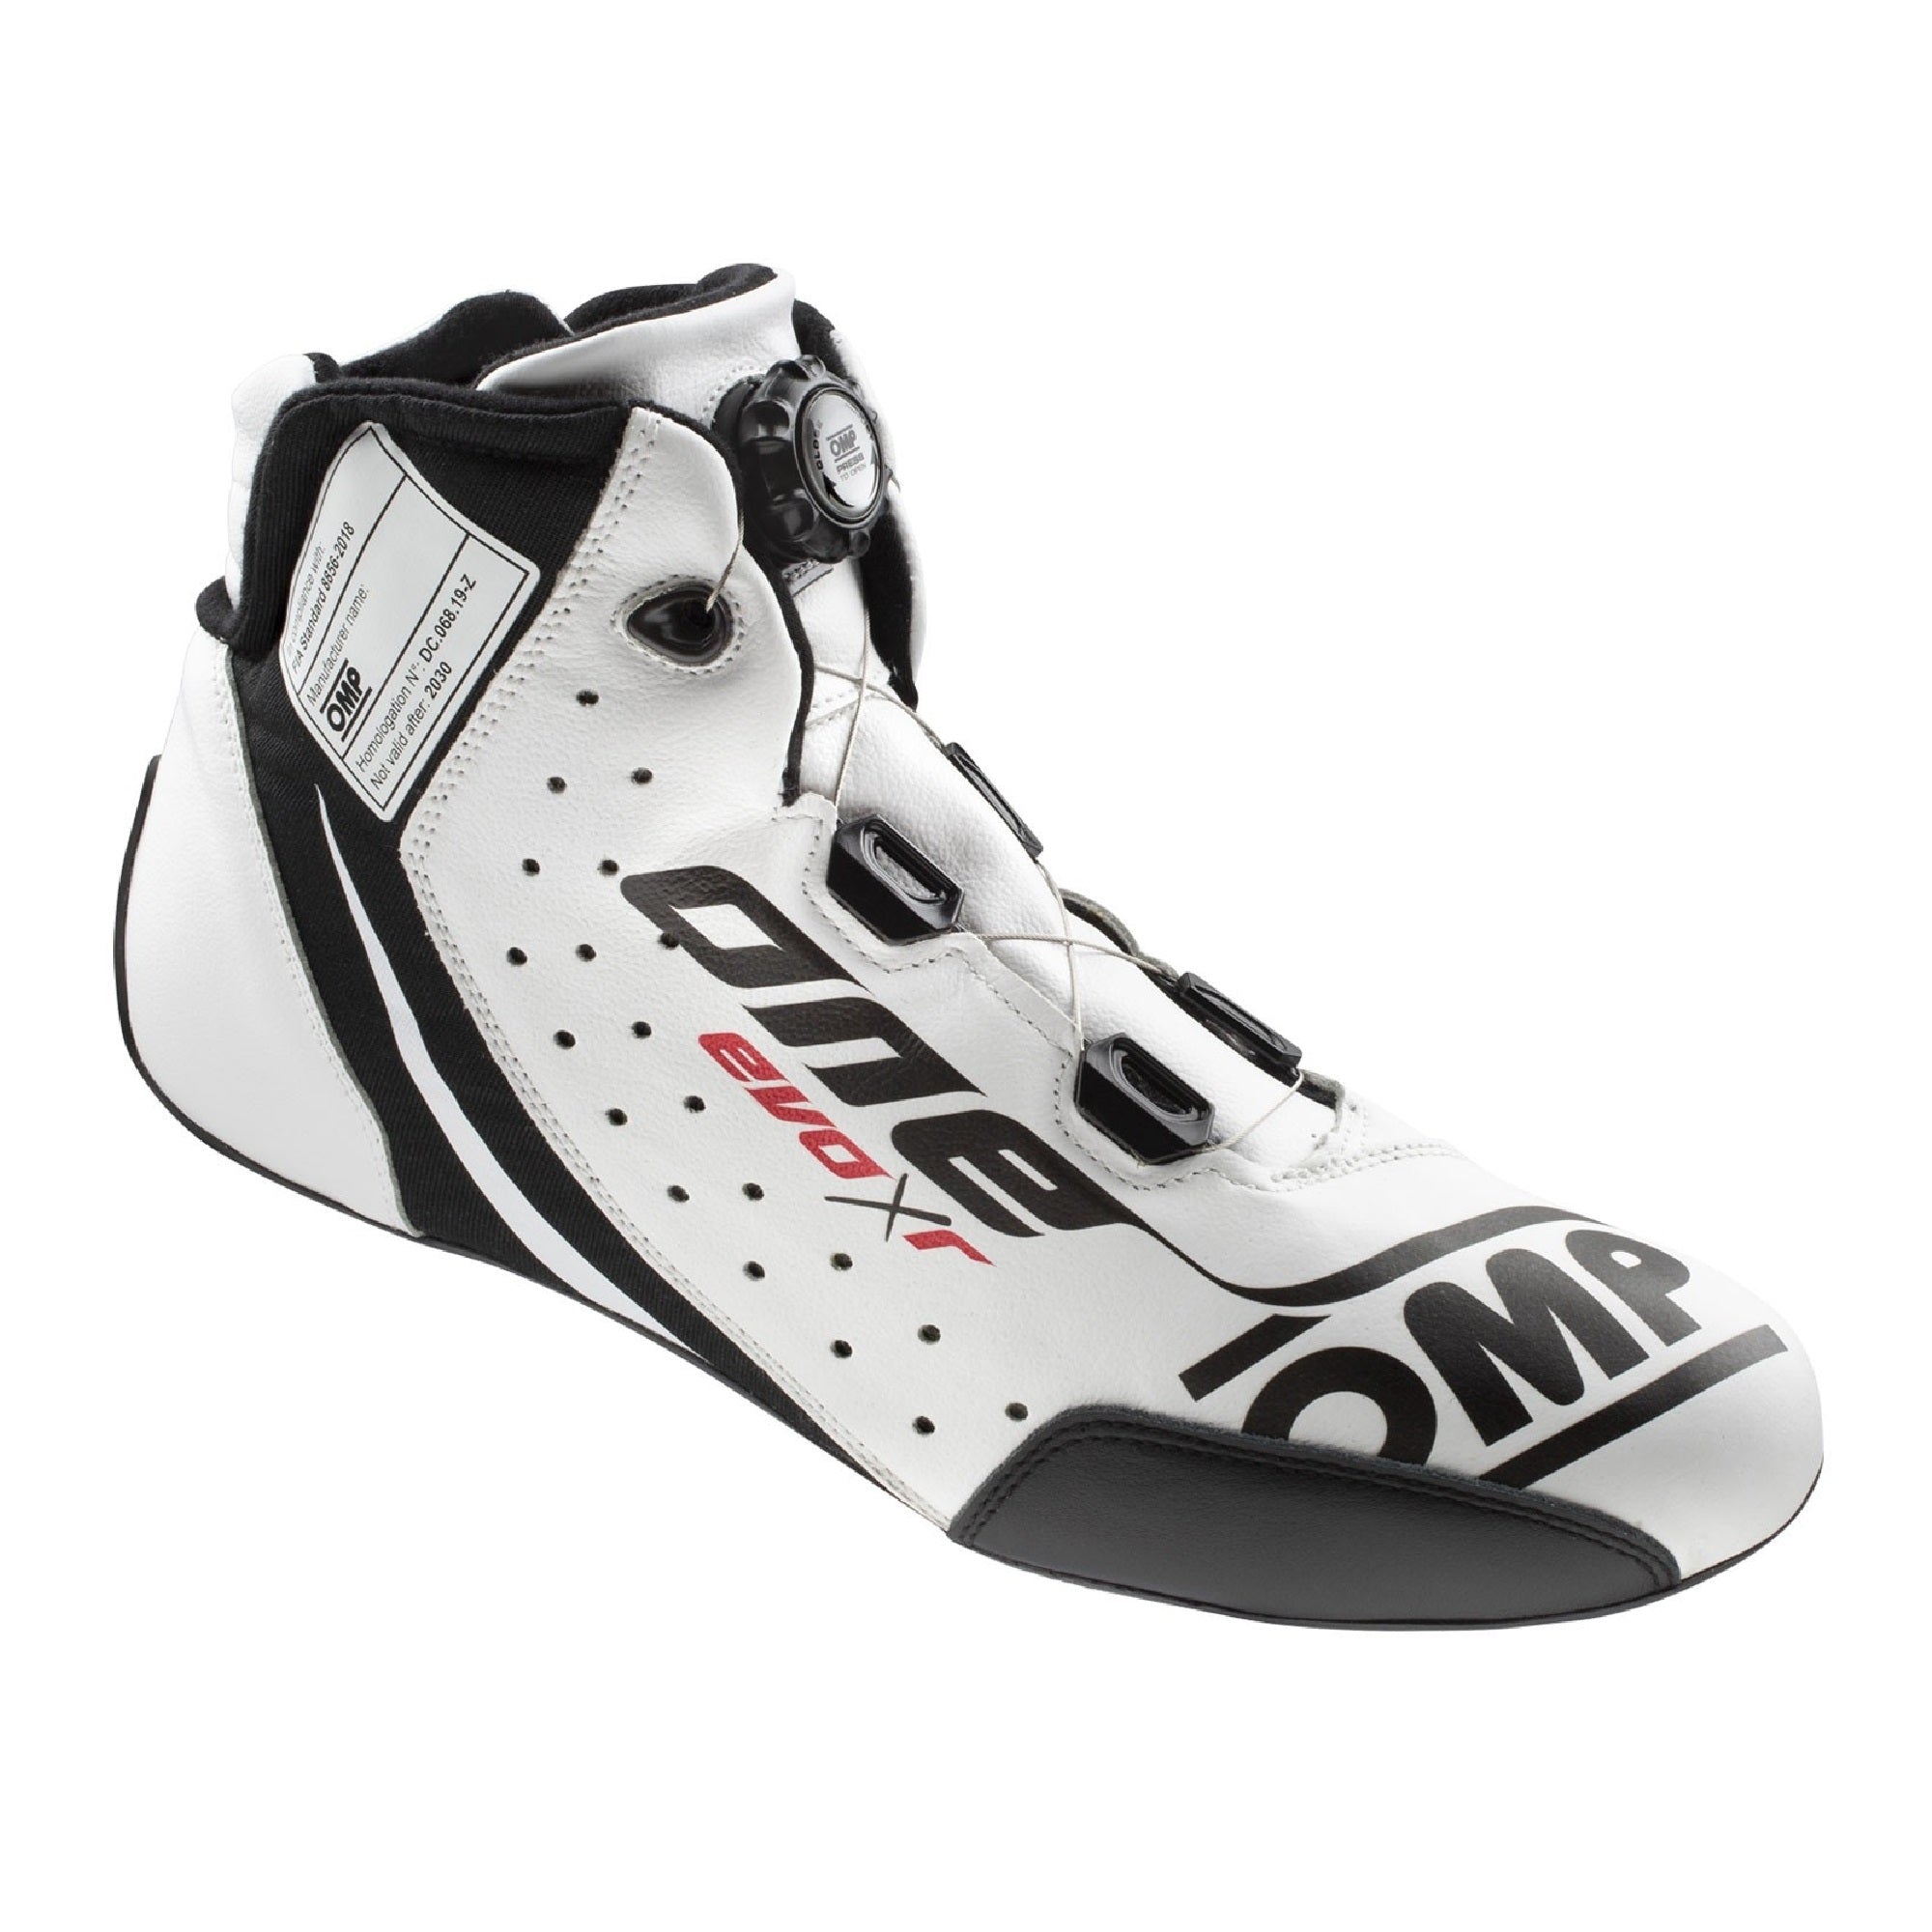 Featured Racing Shoes